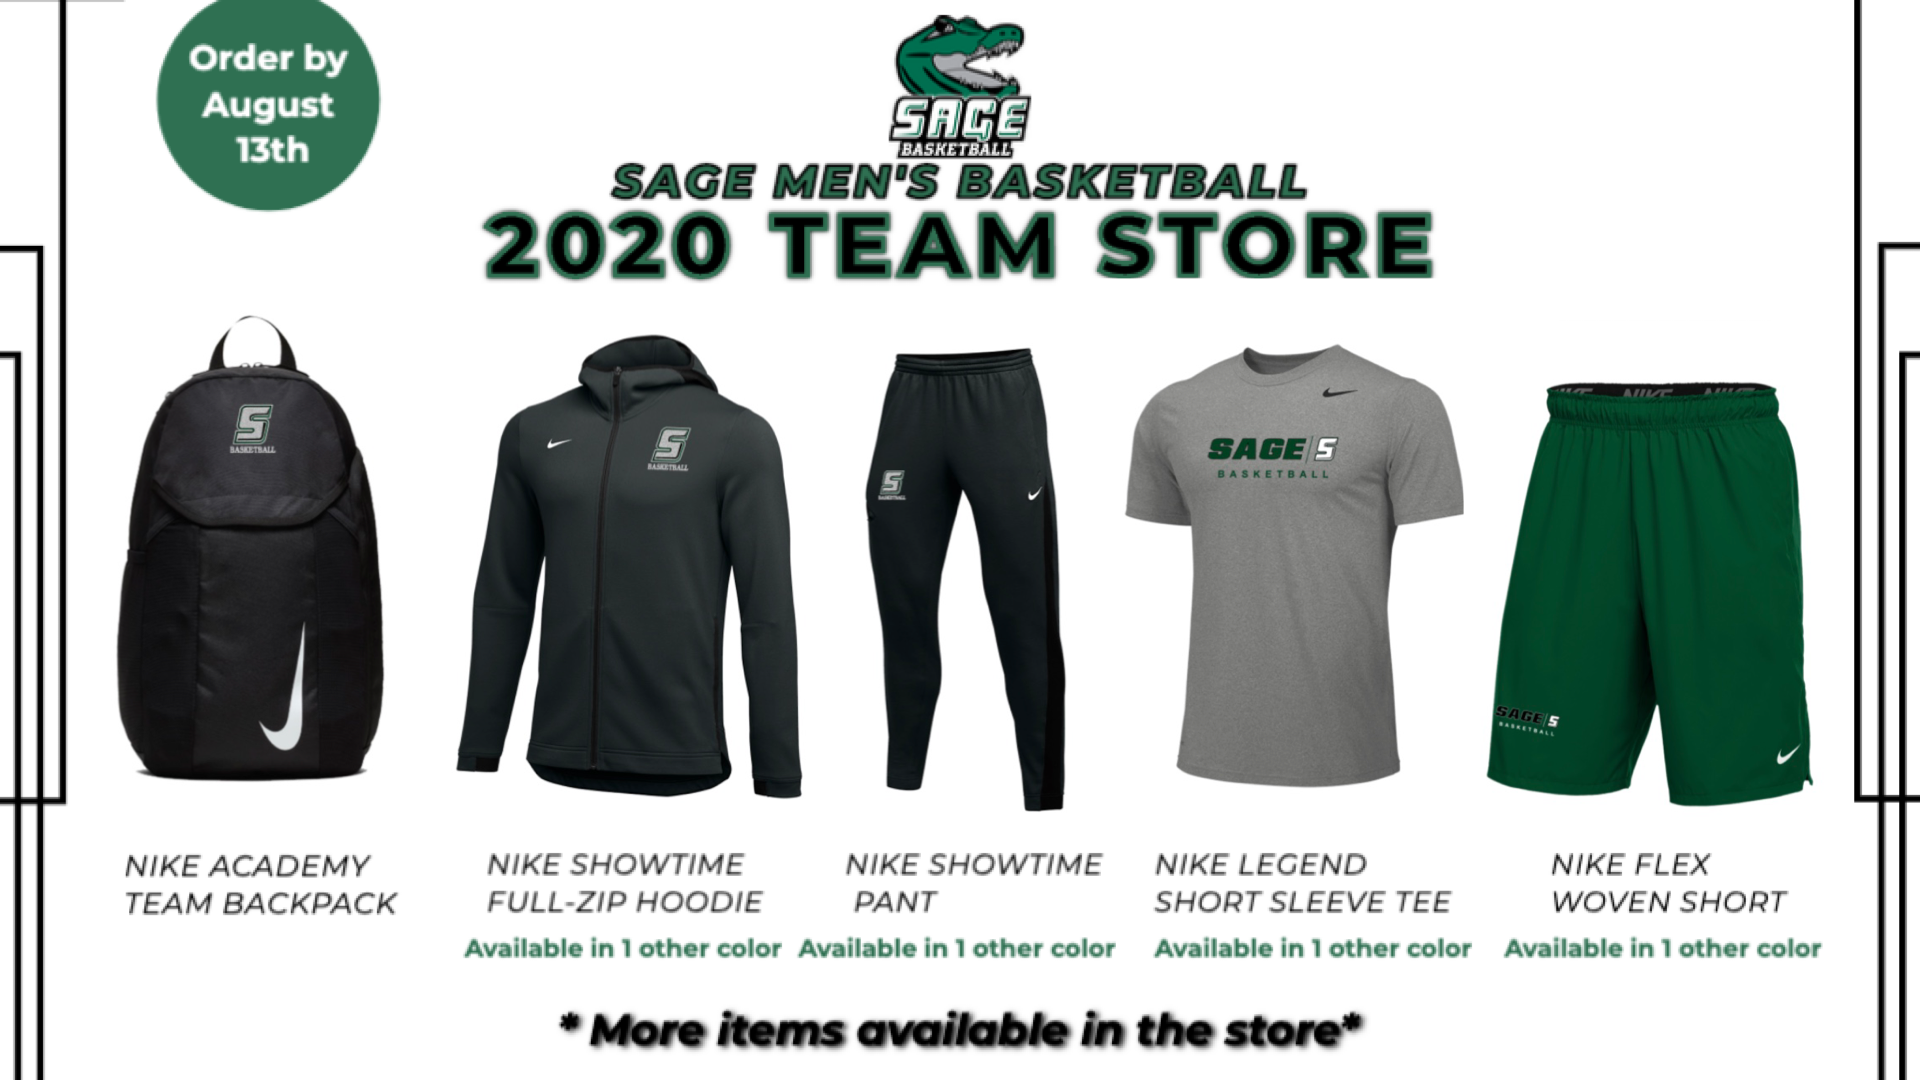 Support Sage Men's Basketball with a purchase on their Team Store